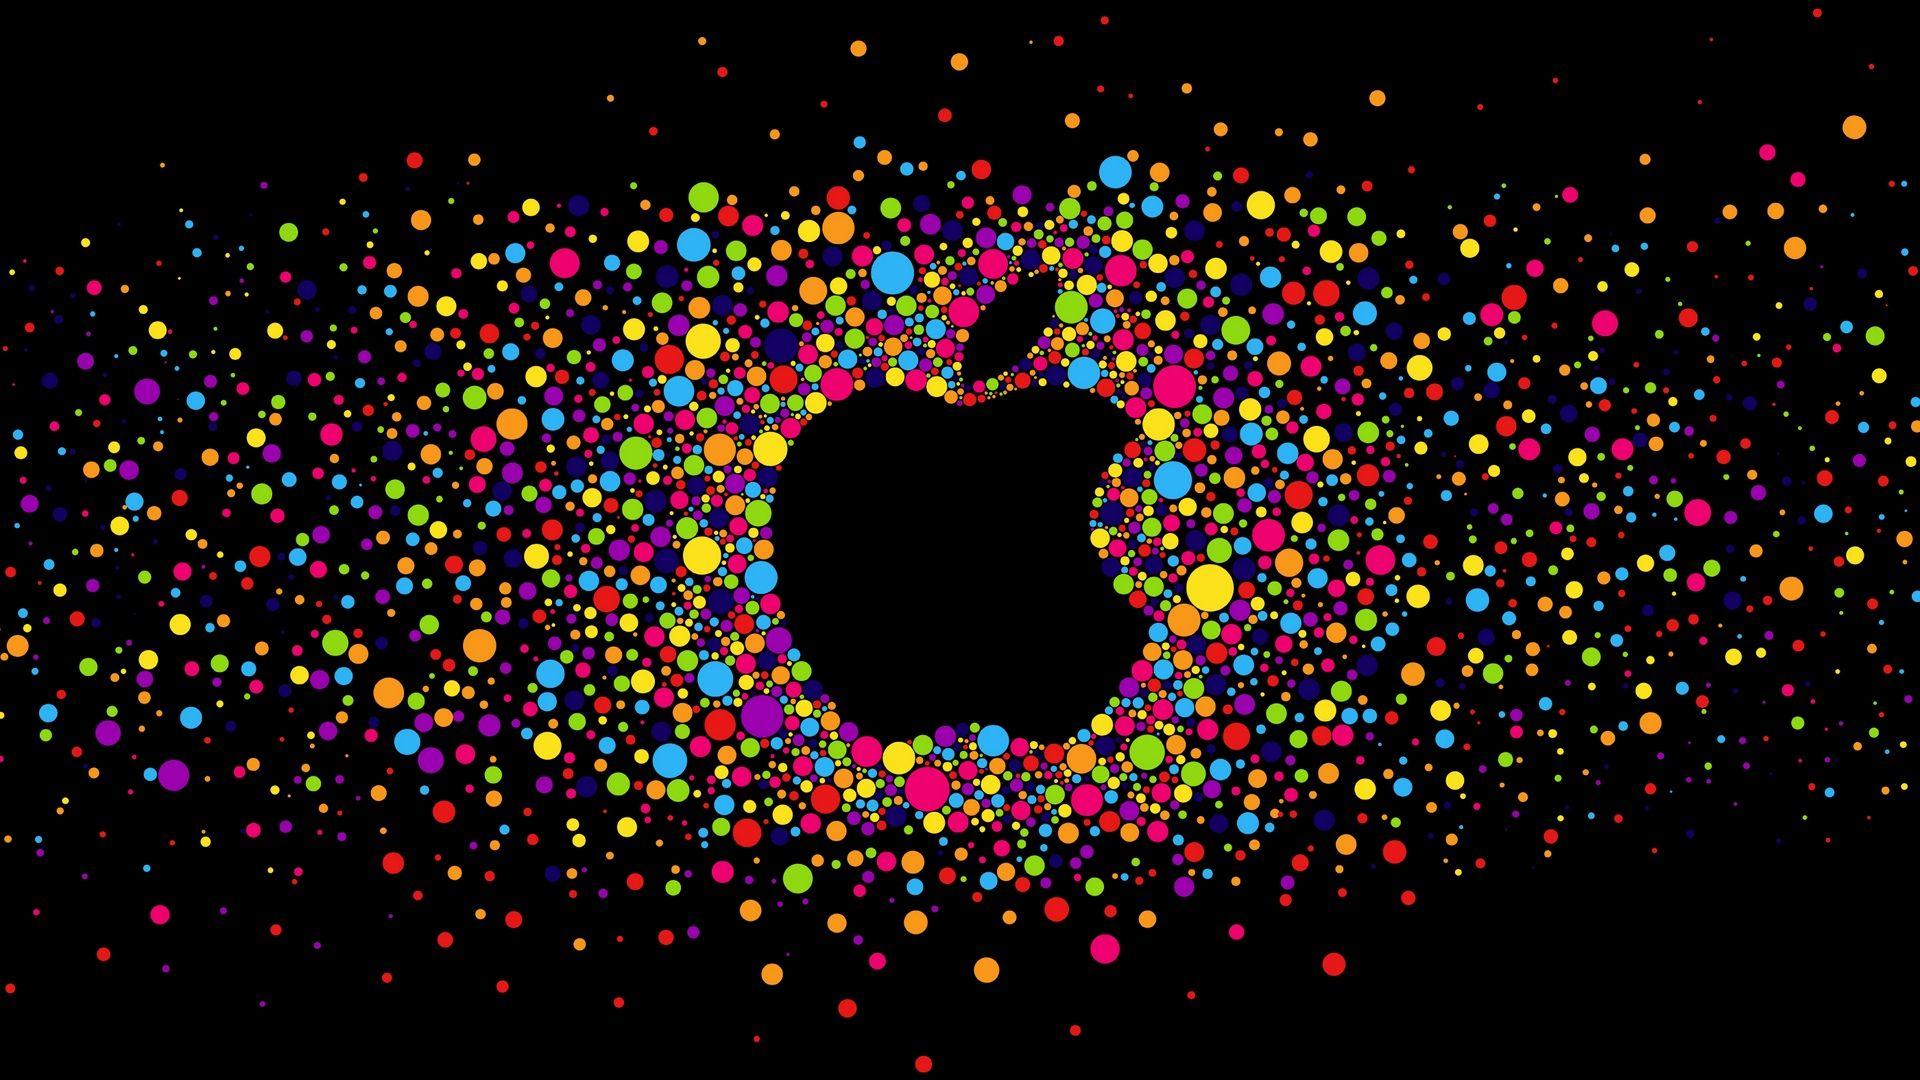 Colorful Apple Logo - Colorful Circles with Black Background and Apple Logo Wallpaper ...